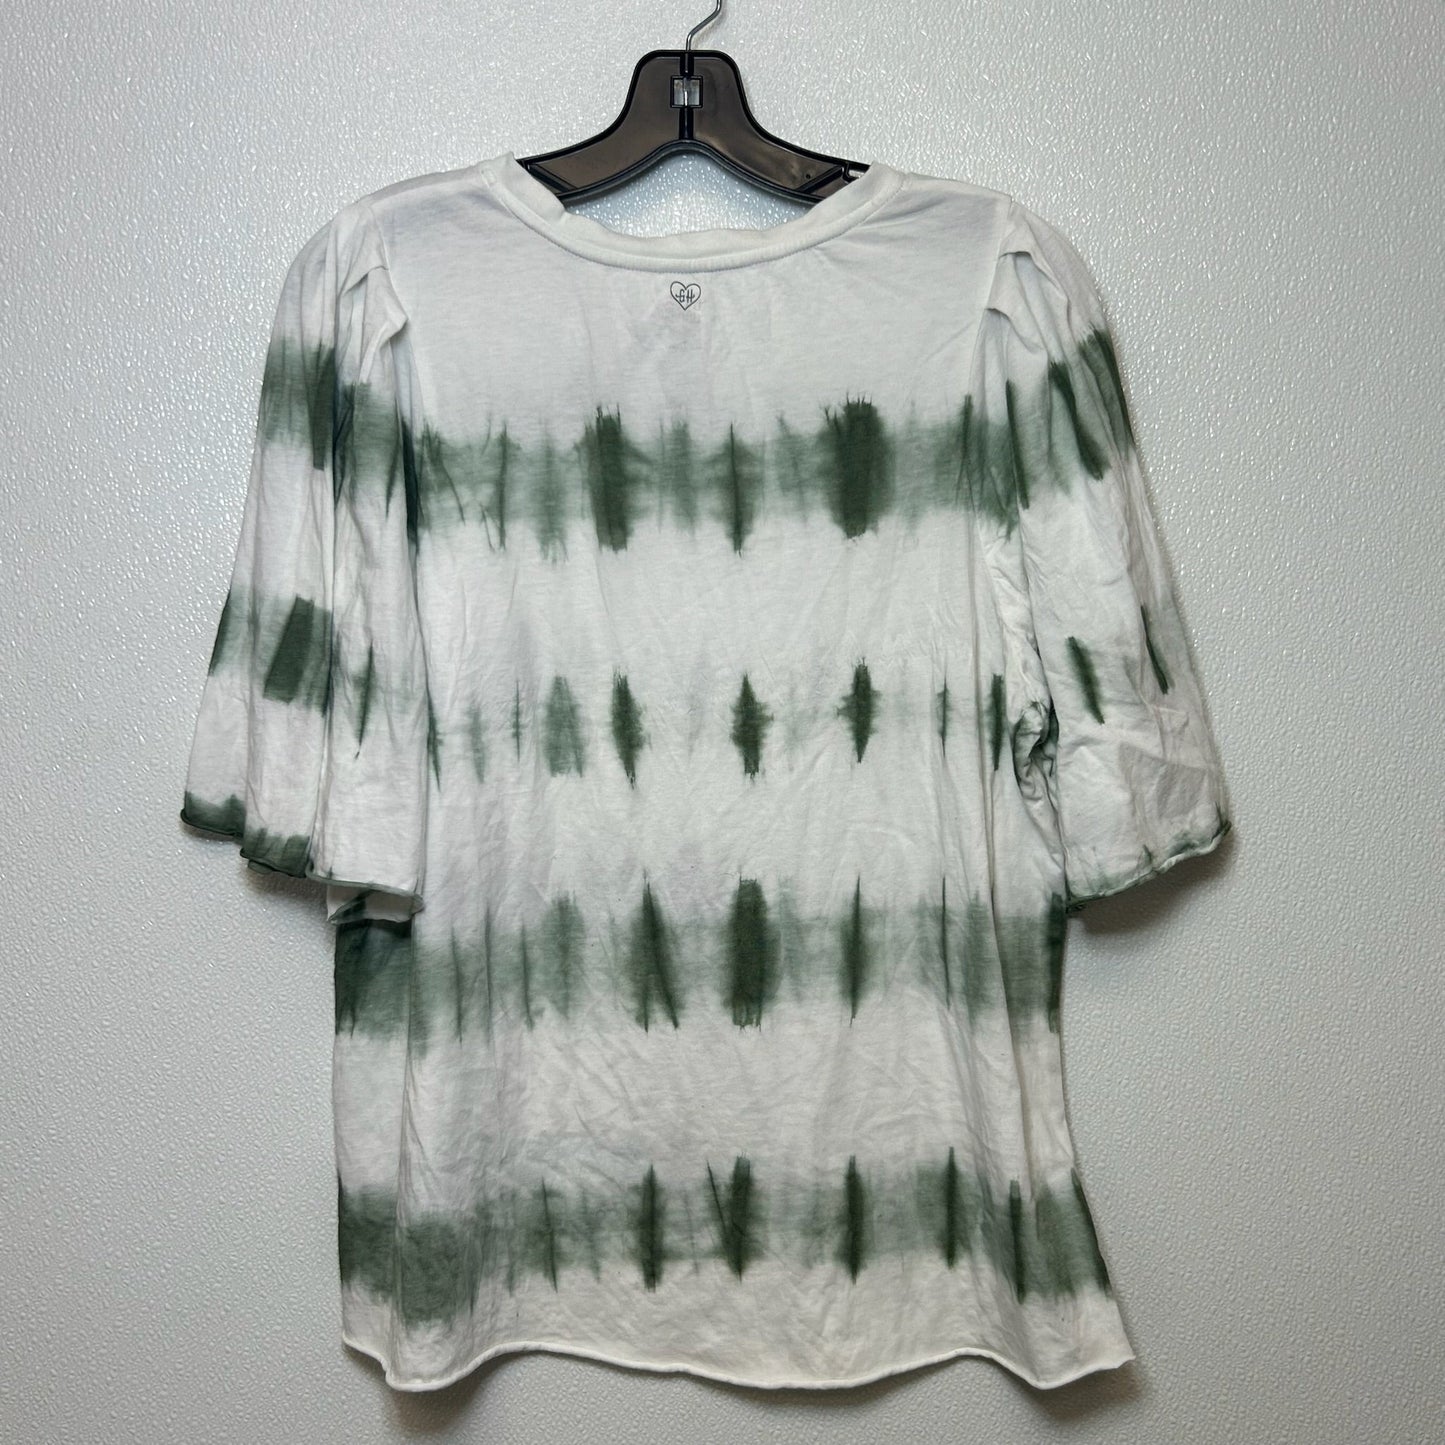 Tie Dye Top Short Sleeve Clothes Mentor, Size M